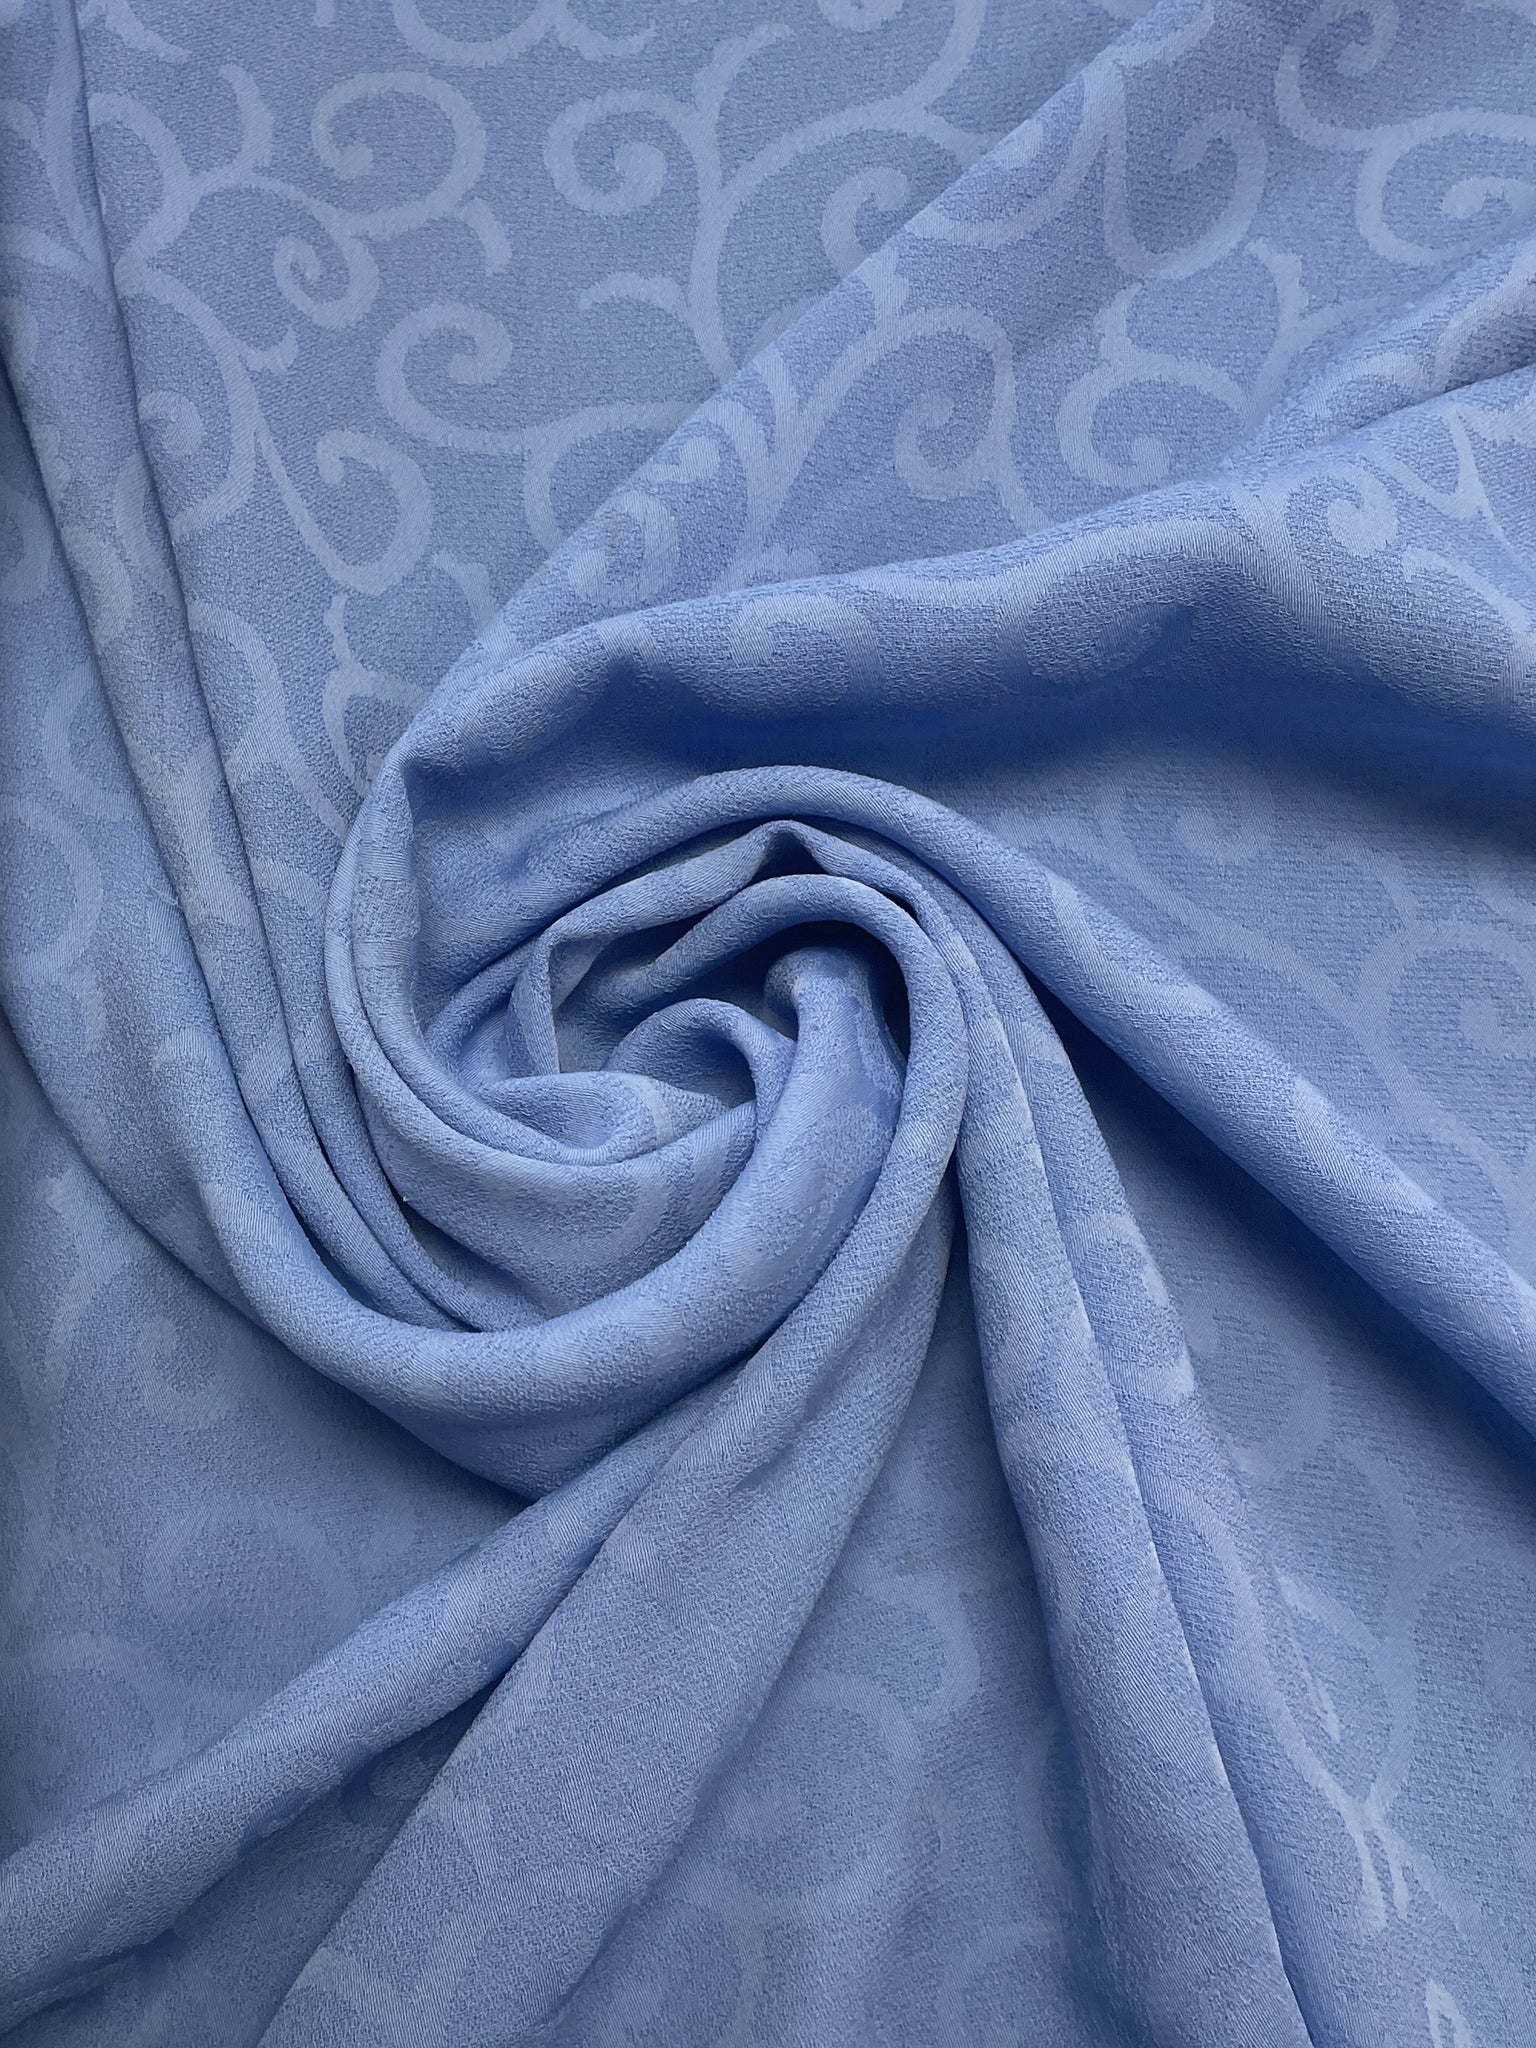 Polyester Crepe - Periwinkle with Filigree Weave